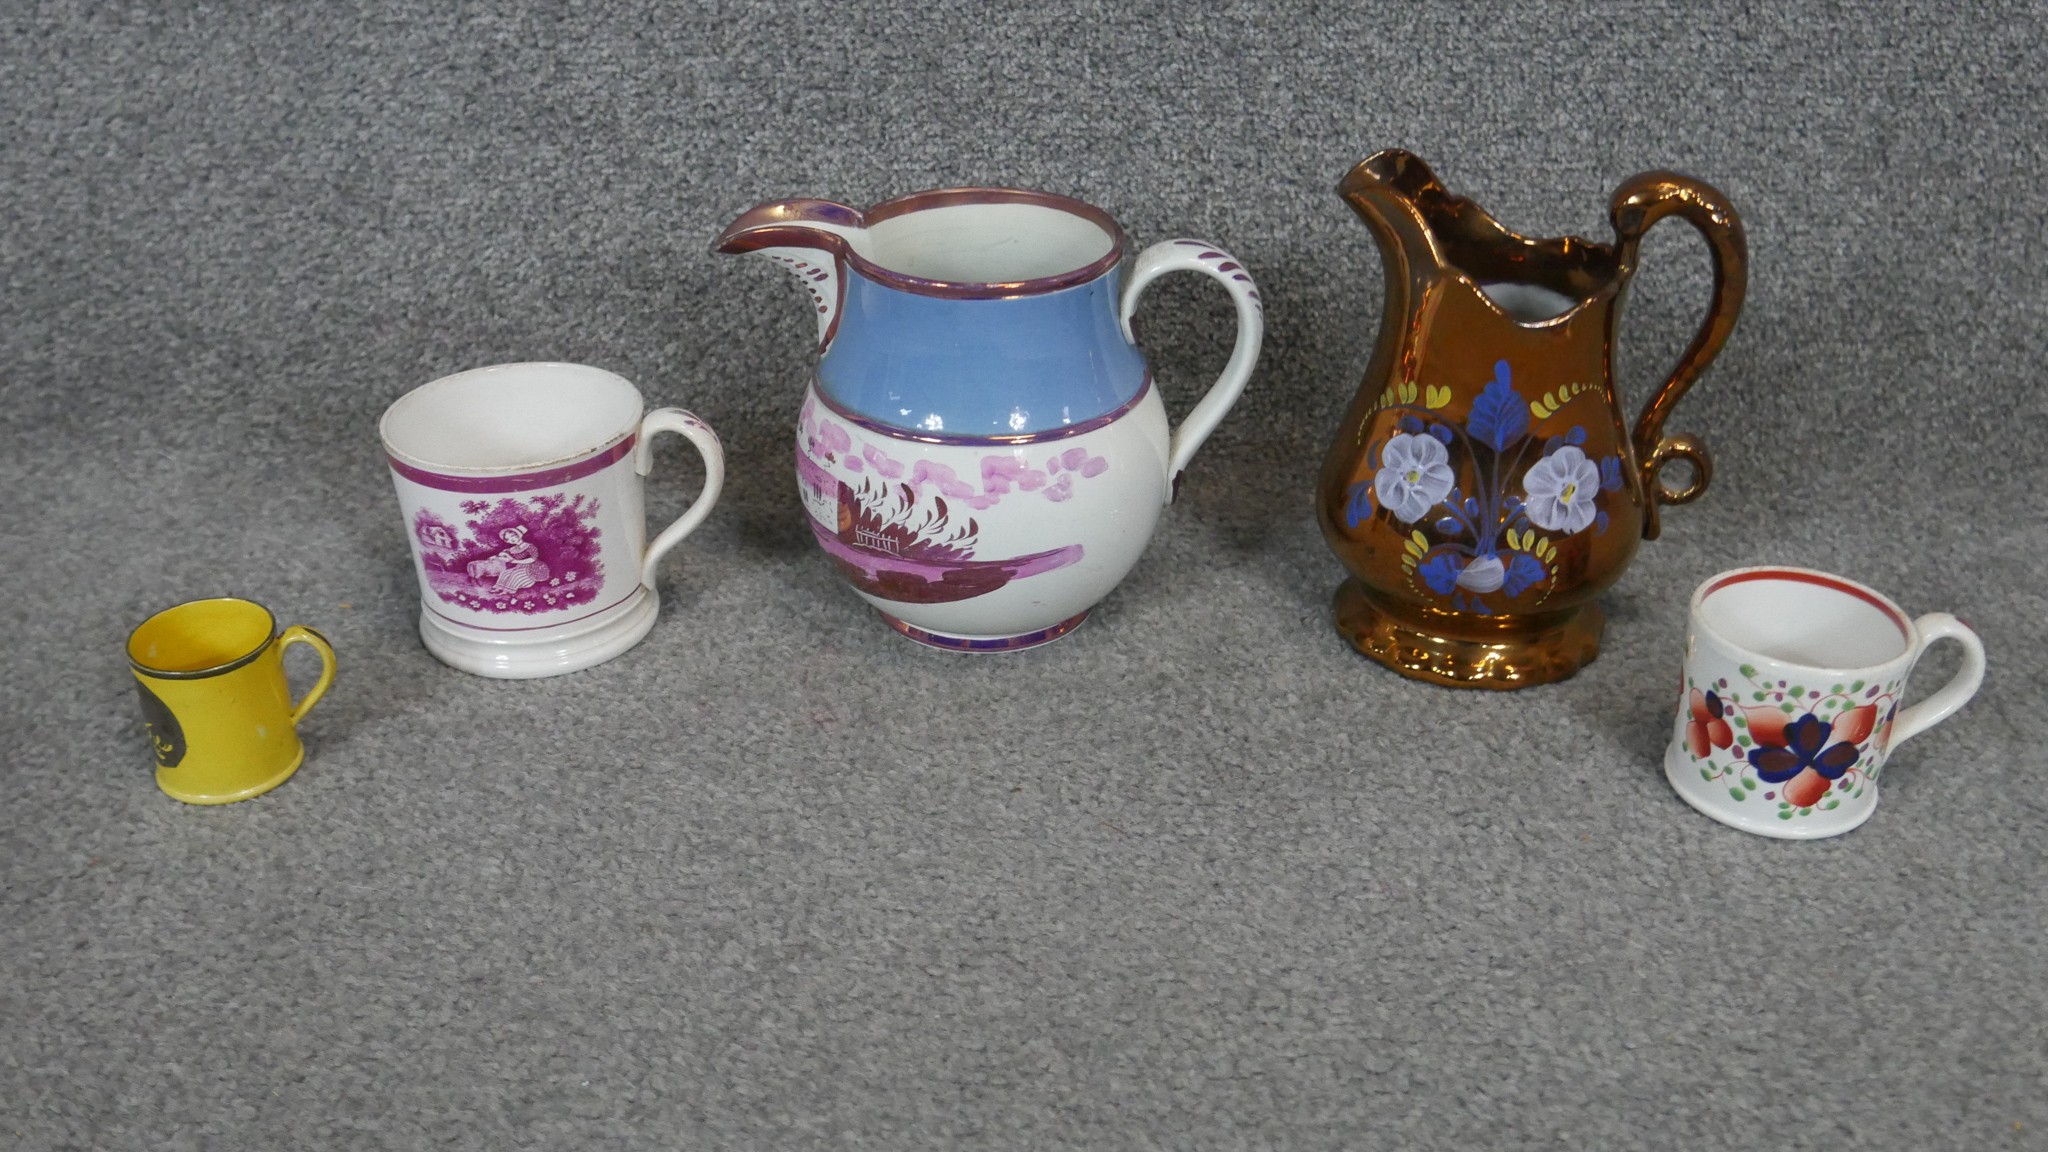 A collection of 19th century lustreware jugs and cups. Including a Sunderland ware jug painted